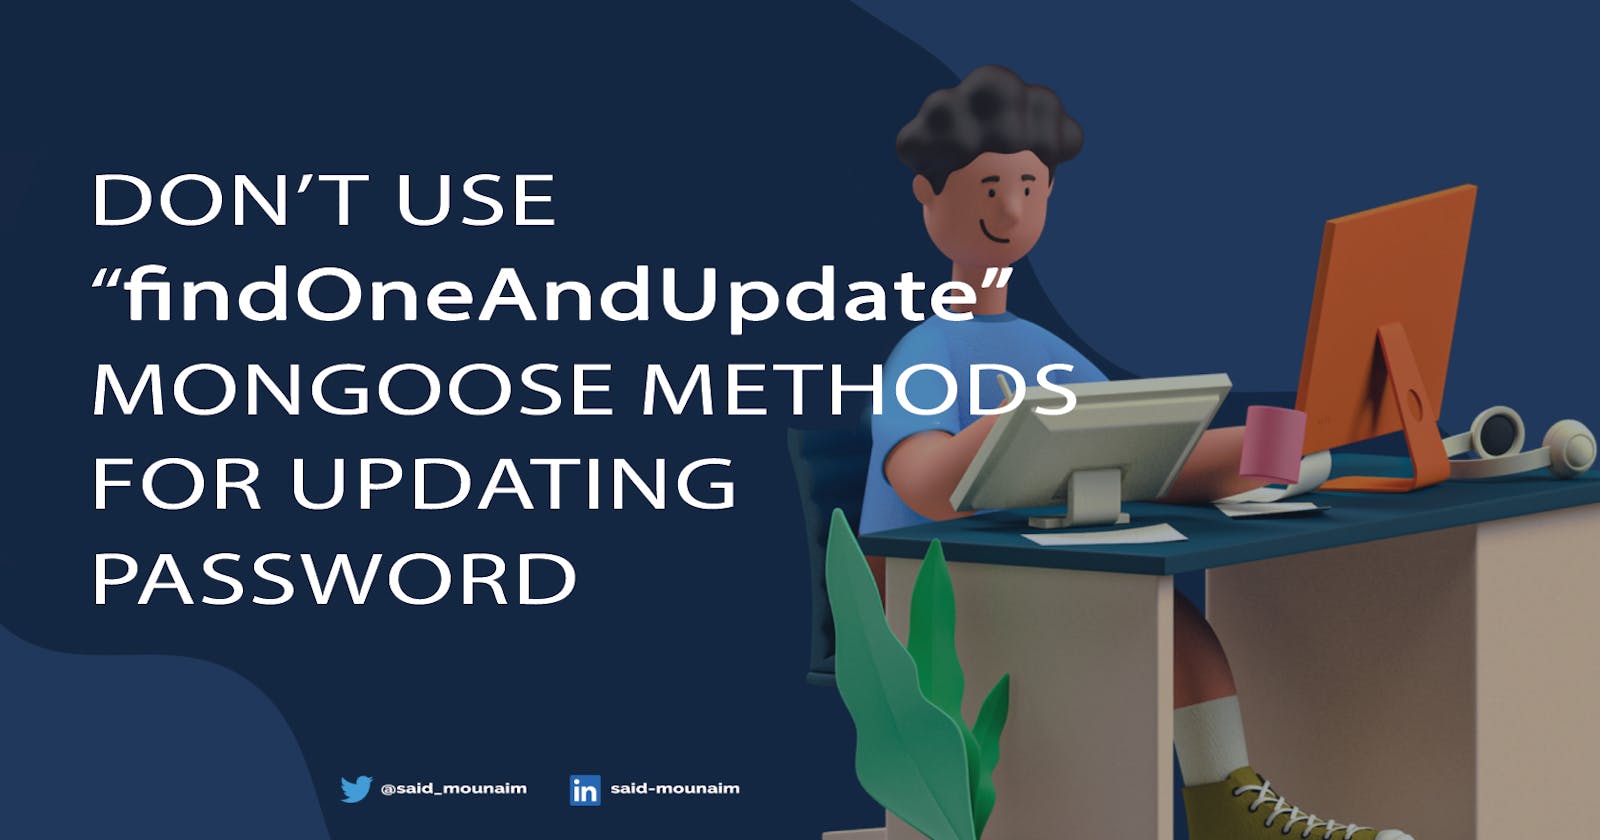 Don’t use  “findOneAndUpdate” mongoose methods for updating password